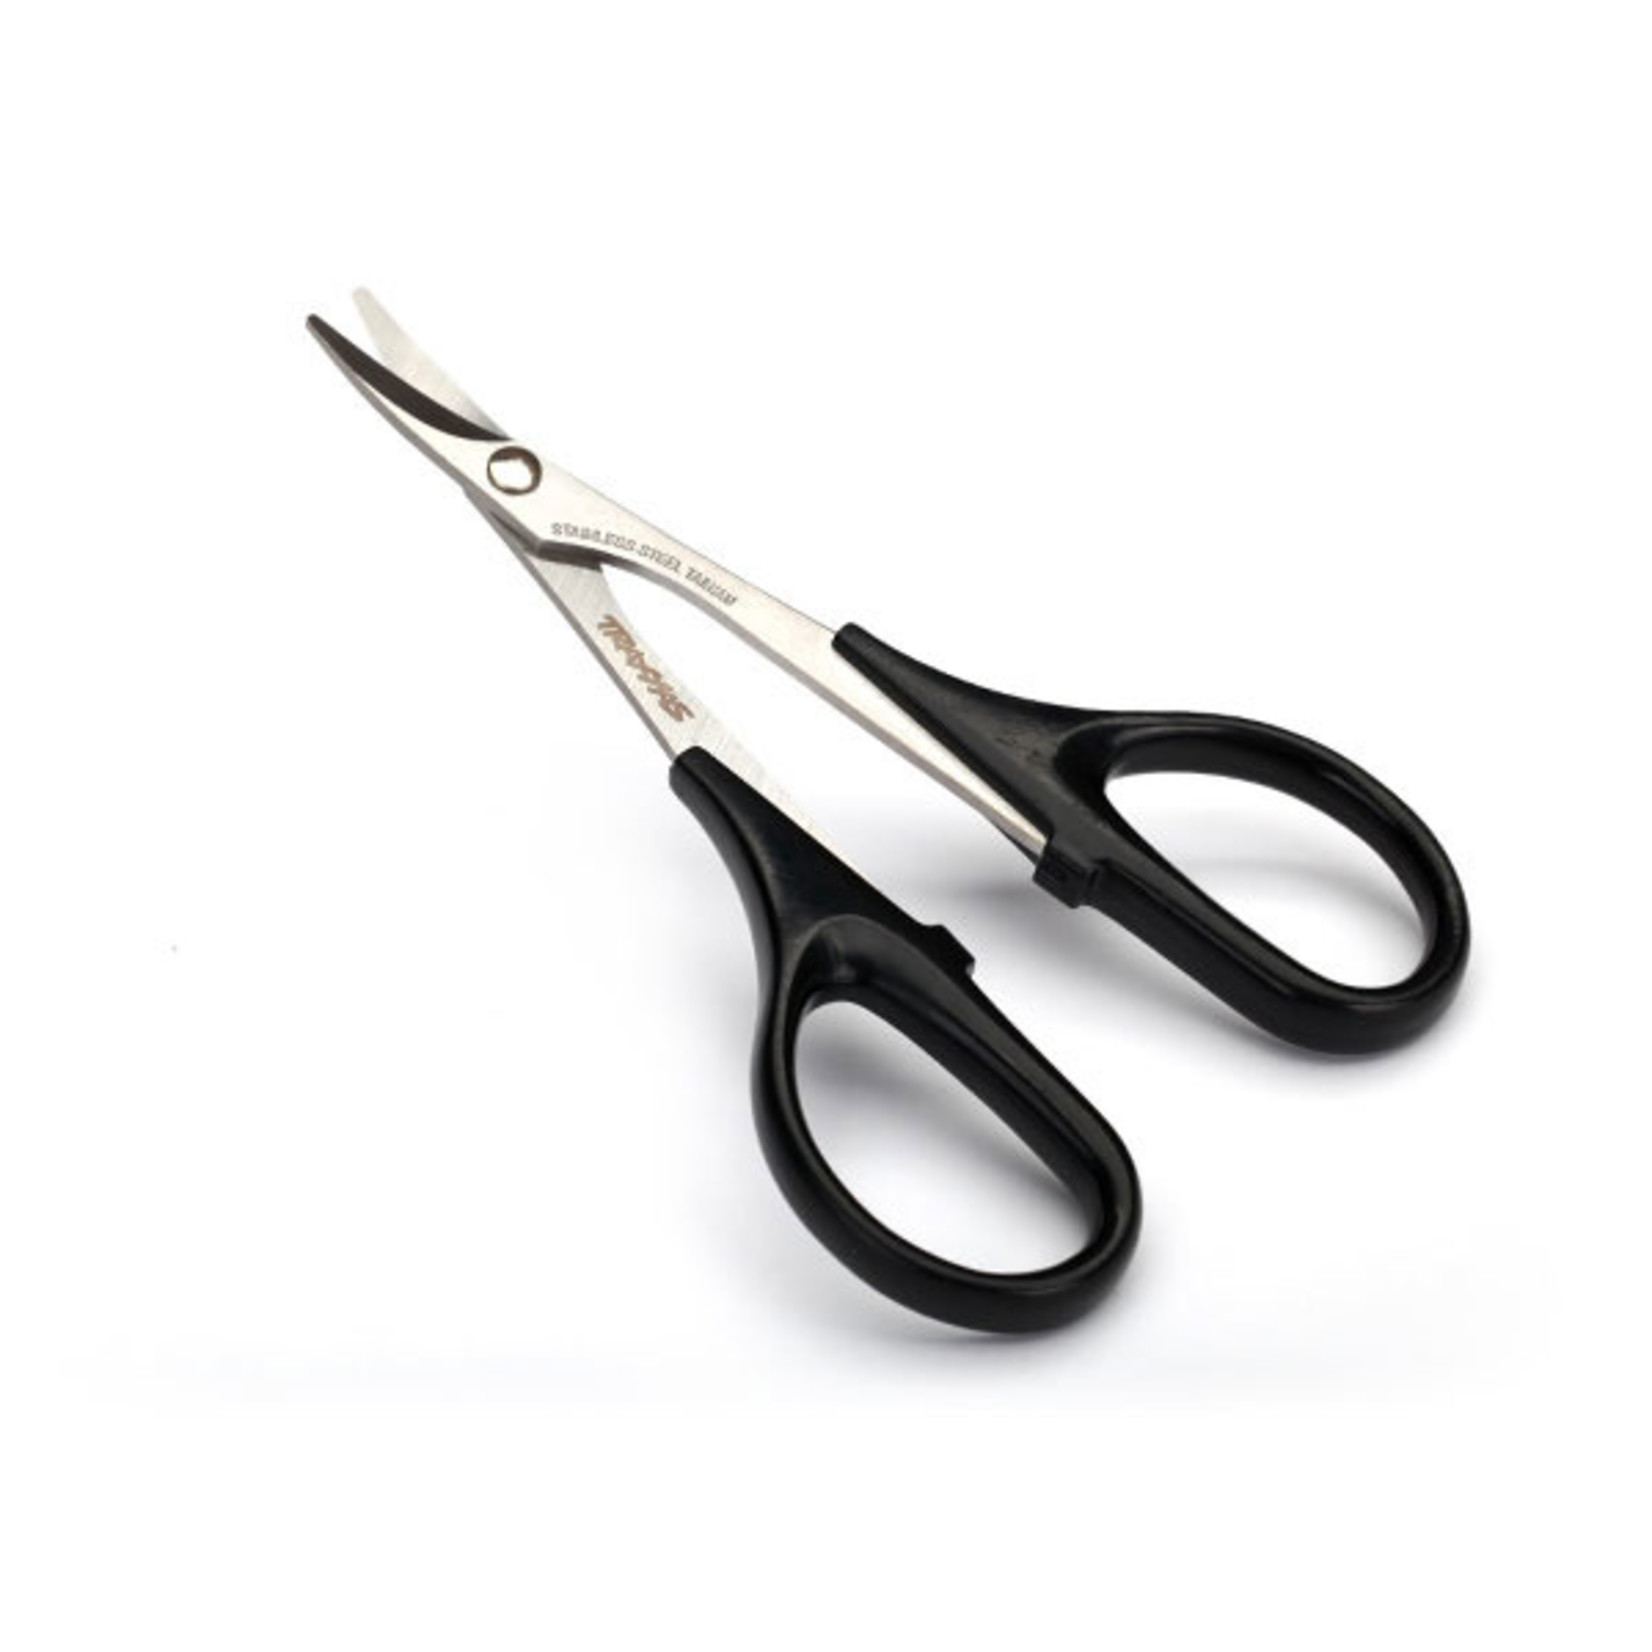 Traxxas 3432 - Scissors, curved tip